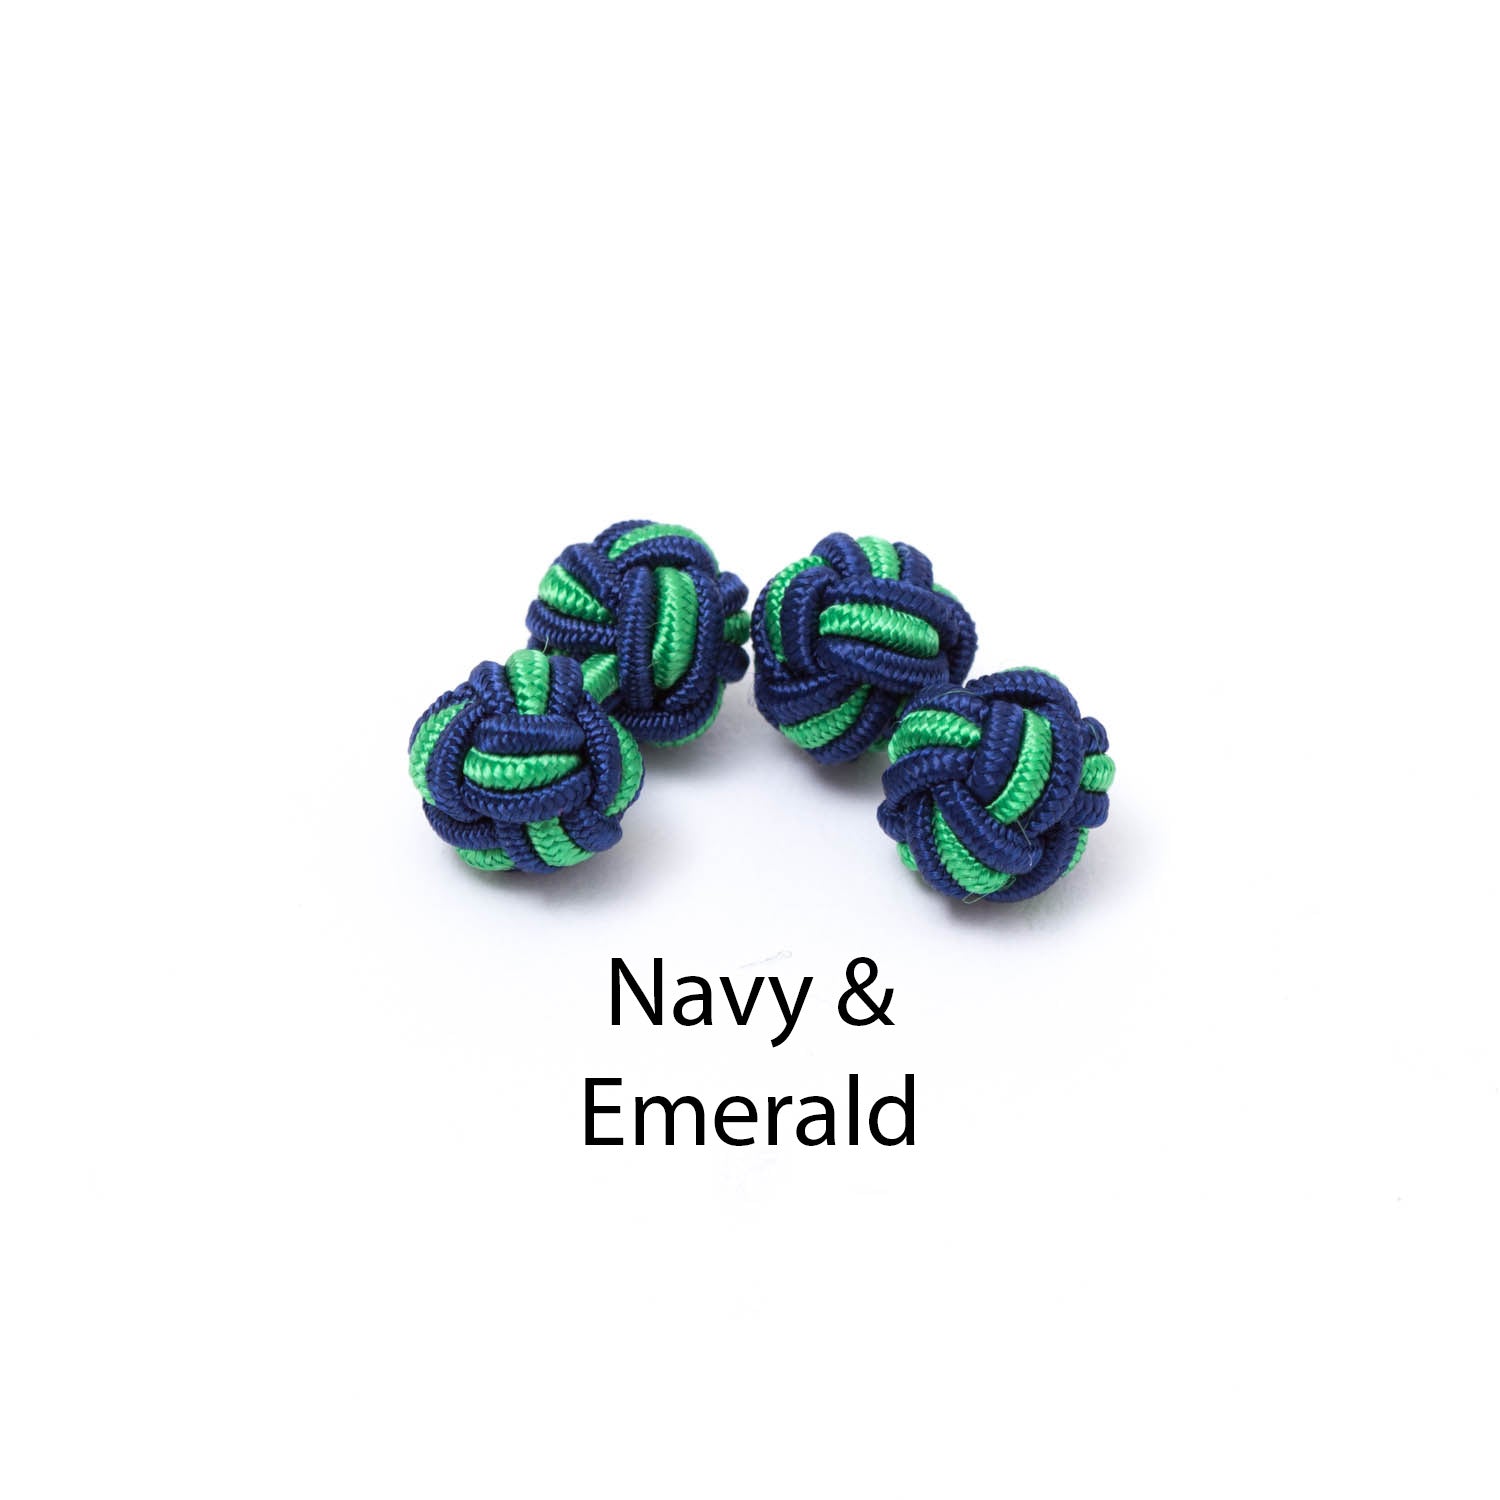 Navy and emerald Dual Colored Knot Cufflinks by KirbyAllison.com for double-cuff shirt.